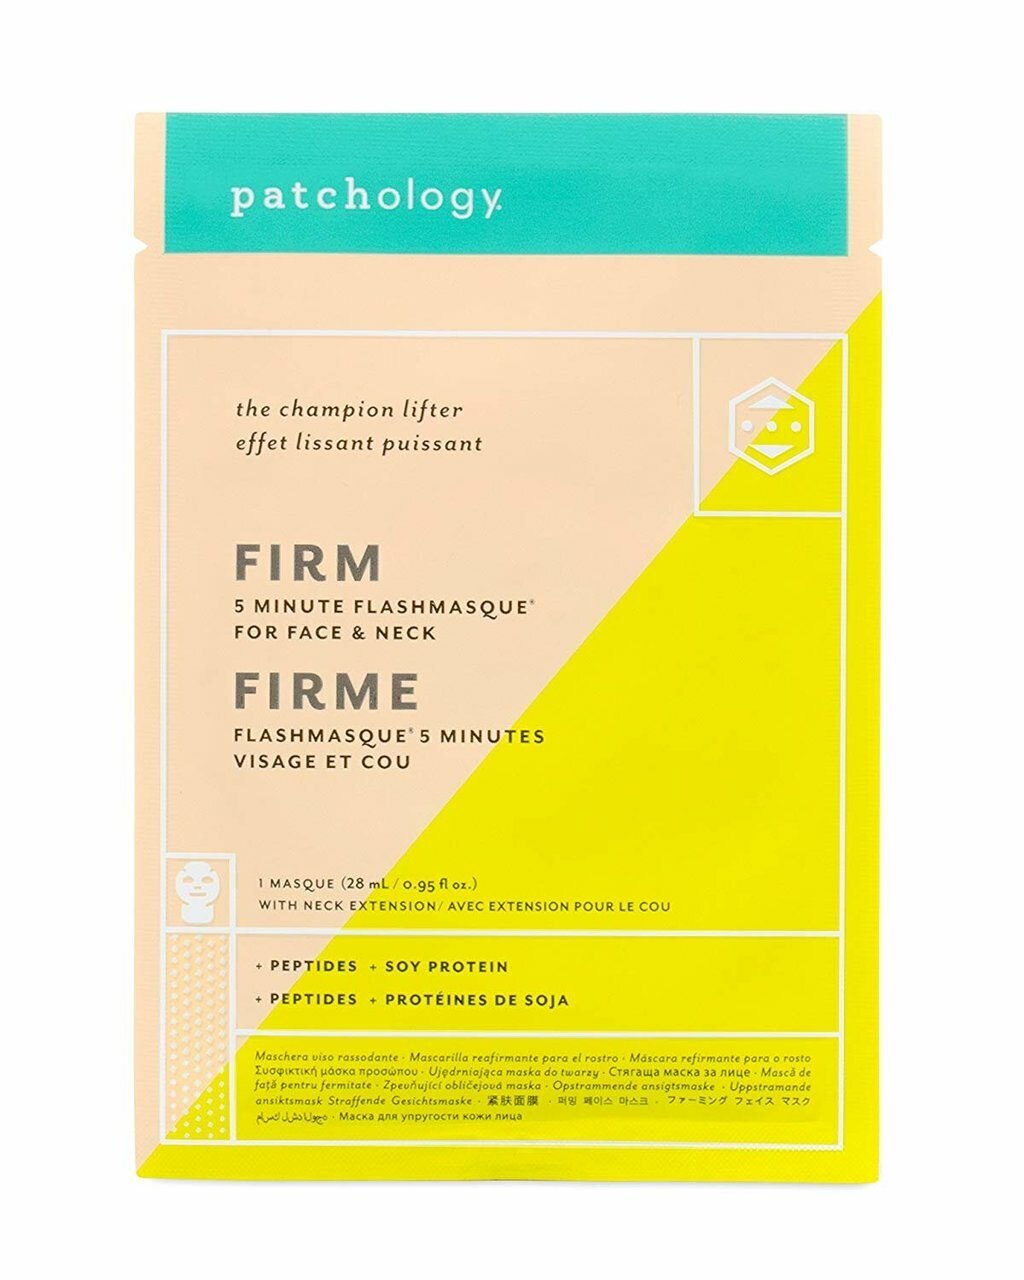 Patchology Flash Masque Firm: Single